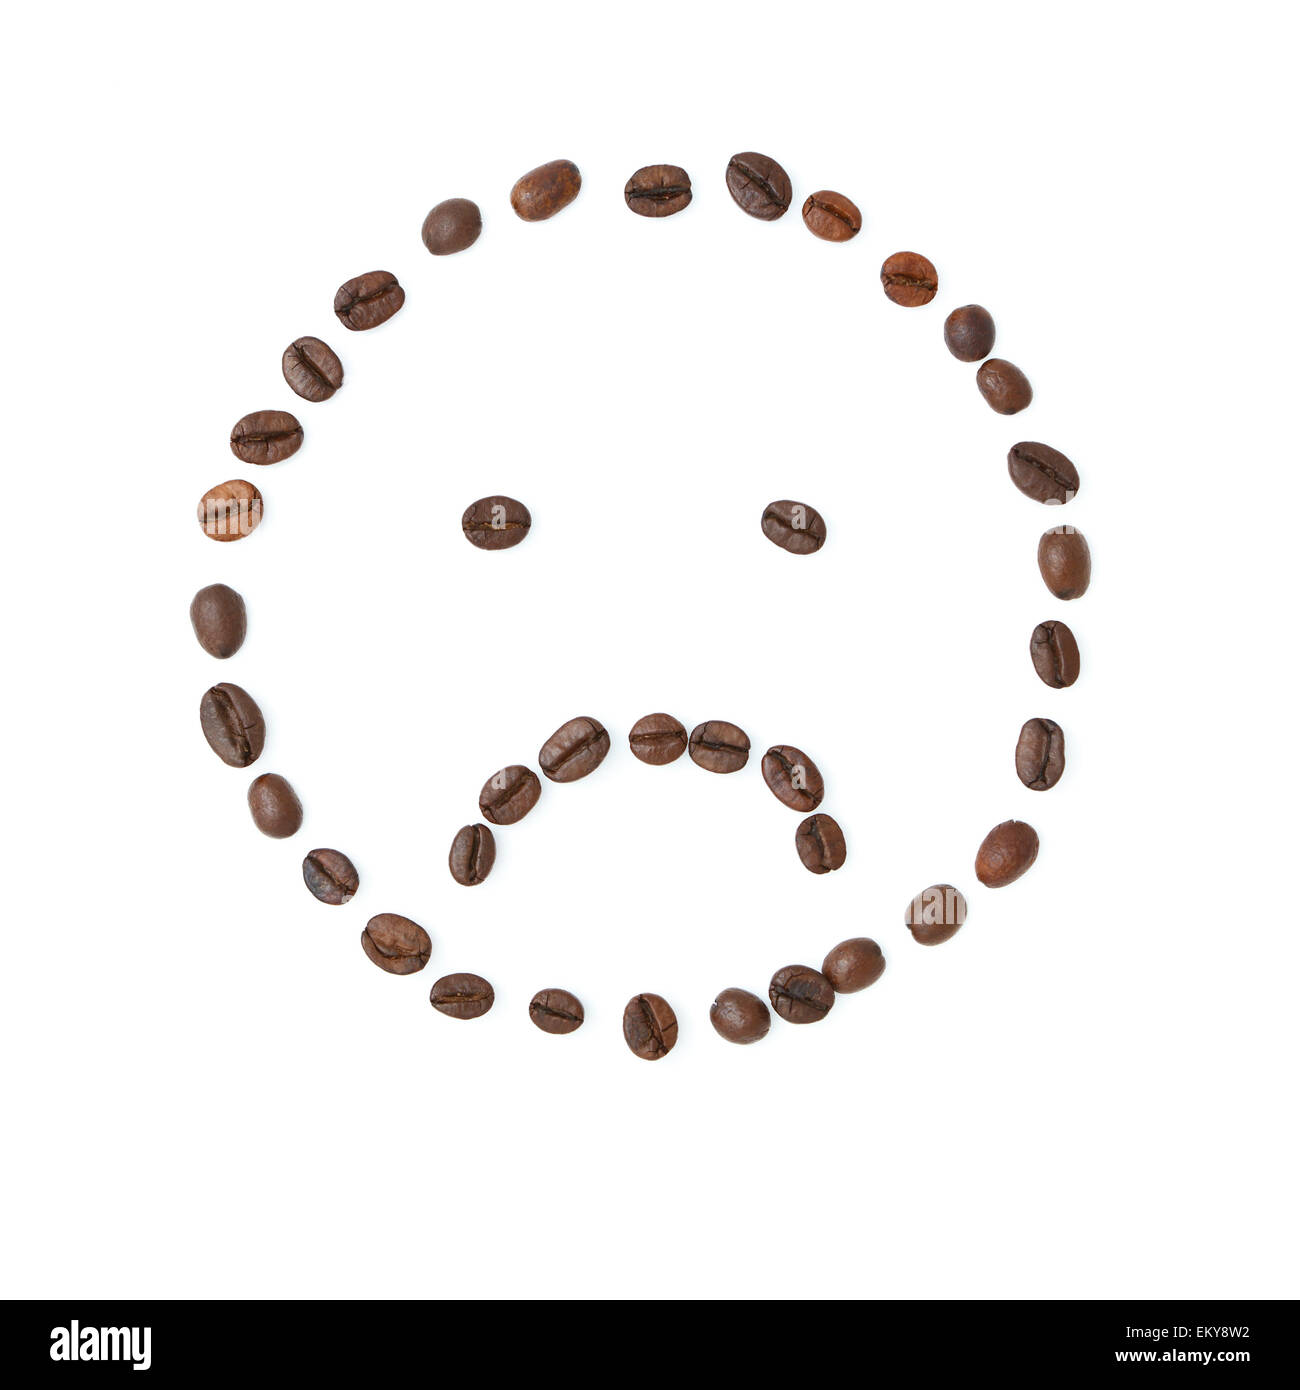 Very sad emoticon made of coffee beans isolated on white background studio shot Stock Photo